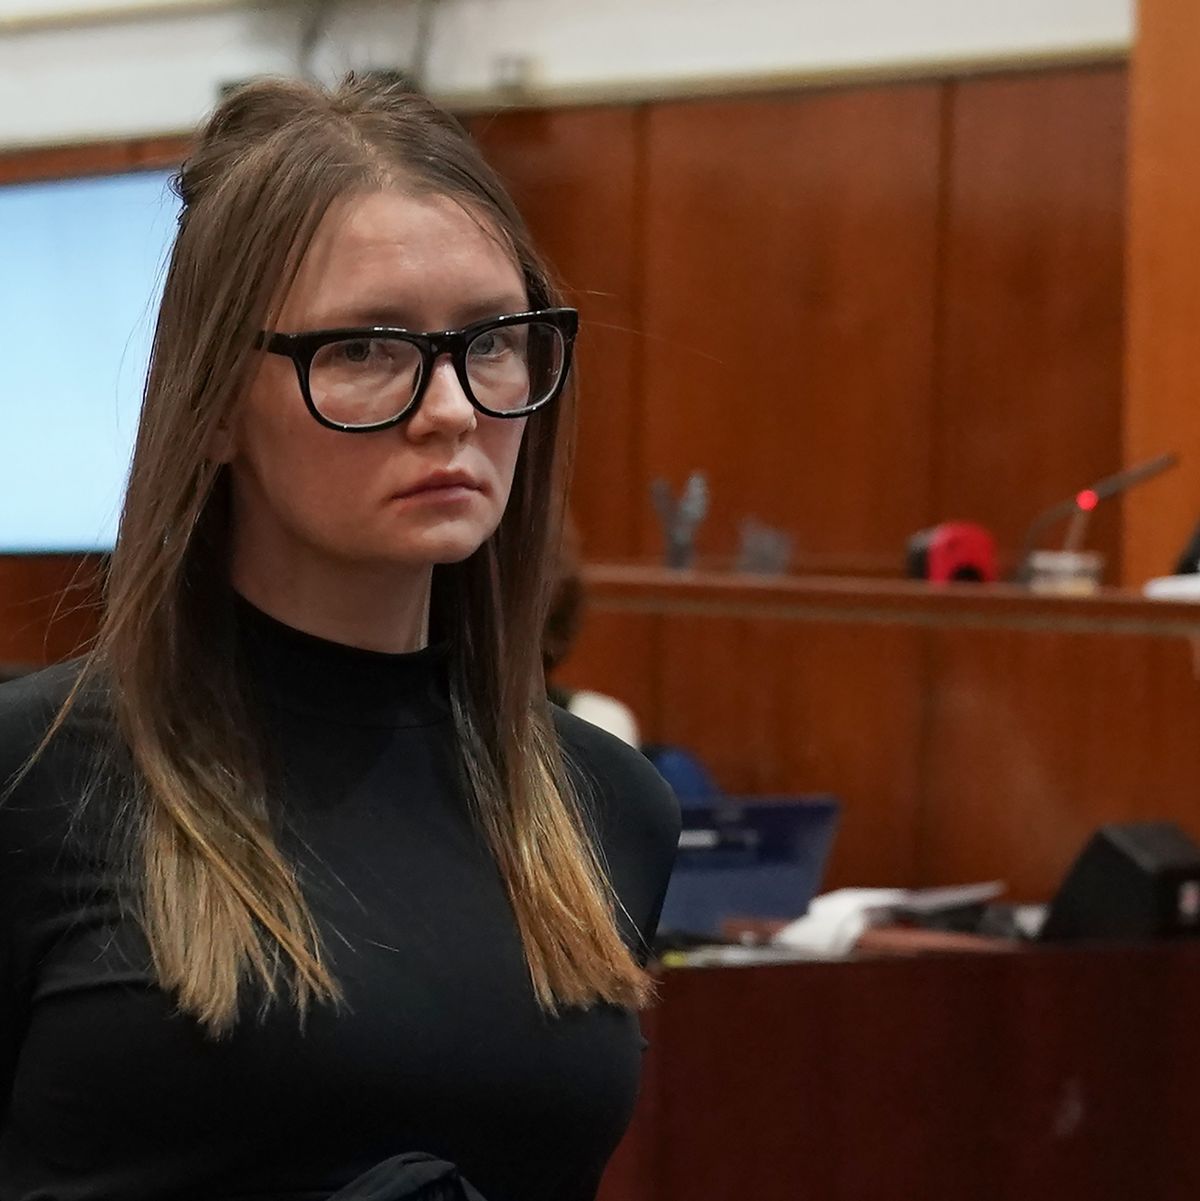 Ann Angel Porn Fake - Where is Anna Delvey (Anna Sorokin) now? And is she on Instagram?